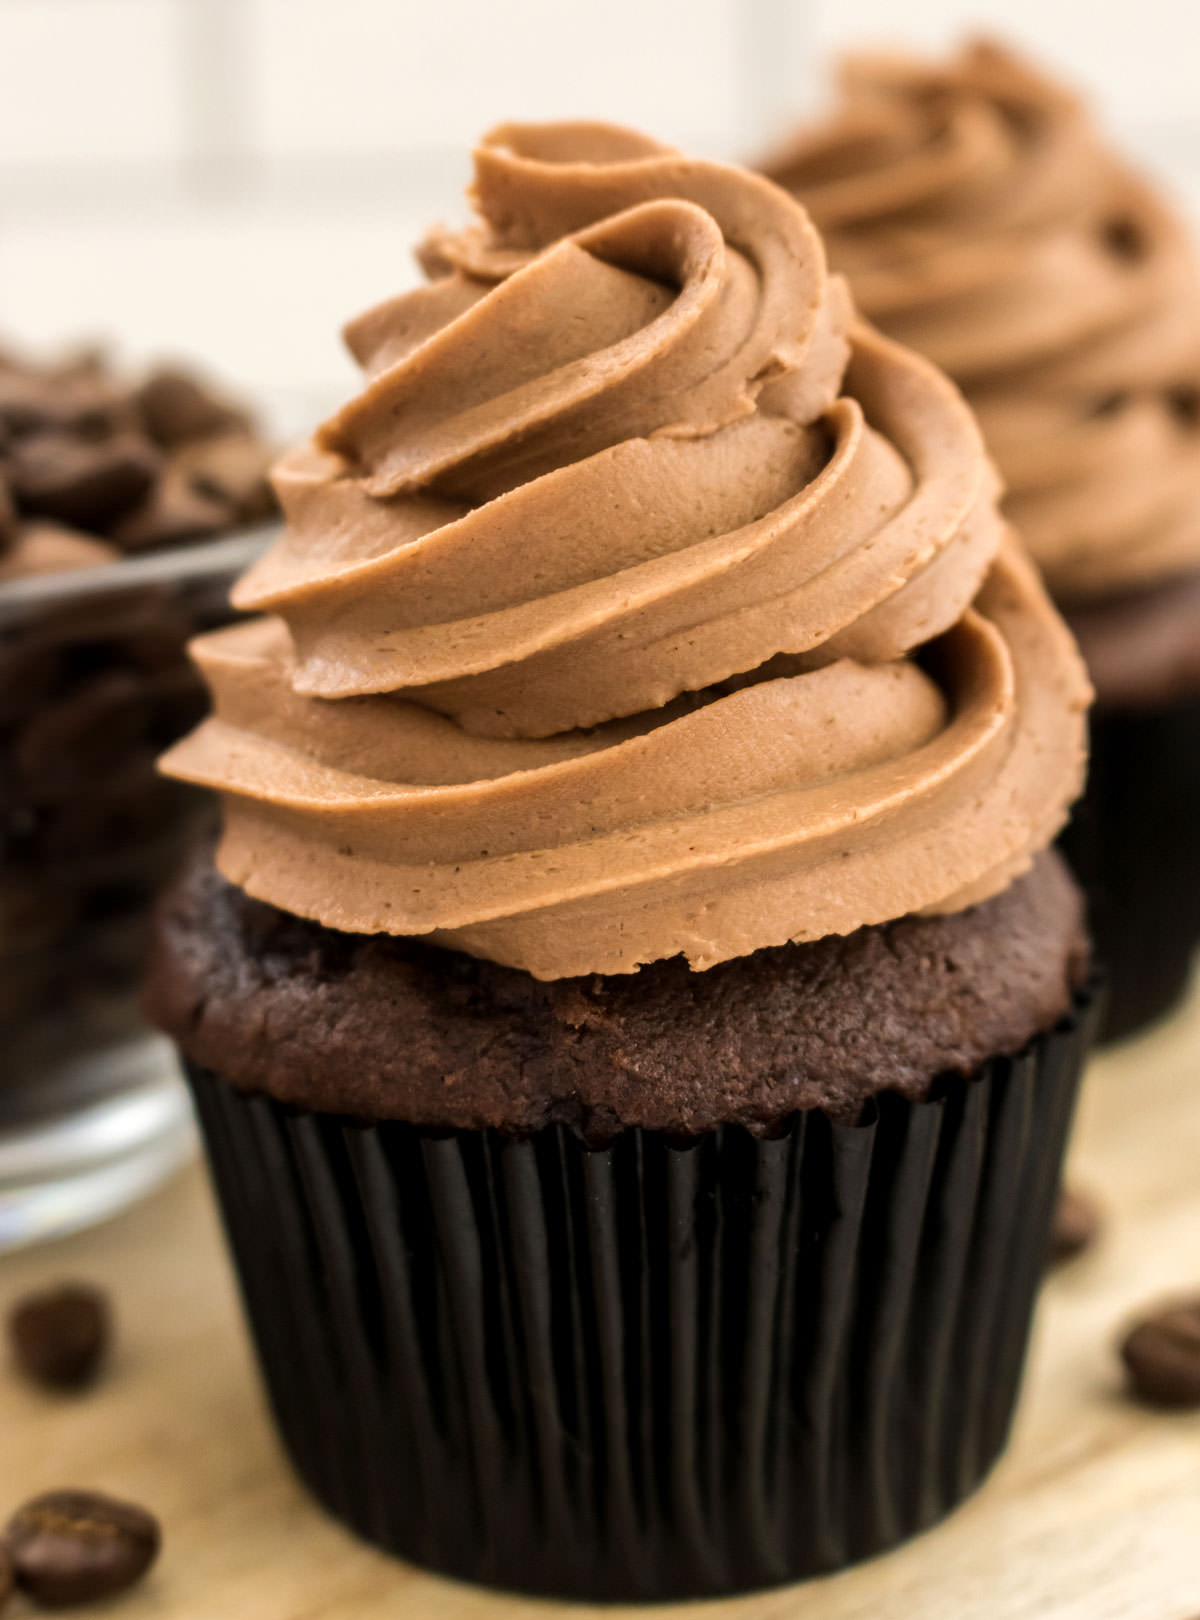 Closeup on a chocolate cupcake topped with The Best Mocha Buttercream Frosting sitting on a cutting board next to a glass bowl filled with coffee beans.